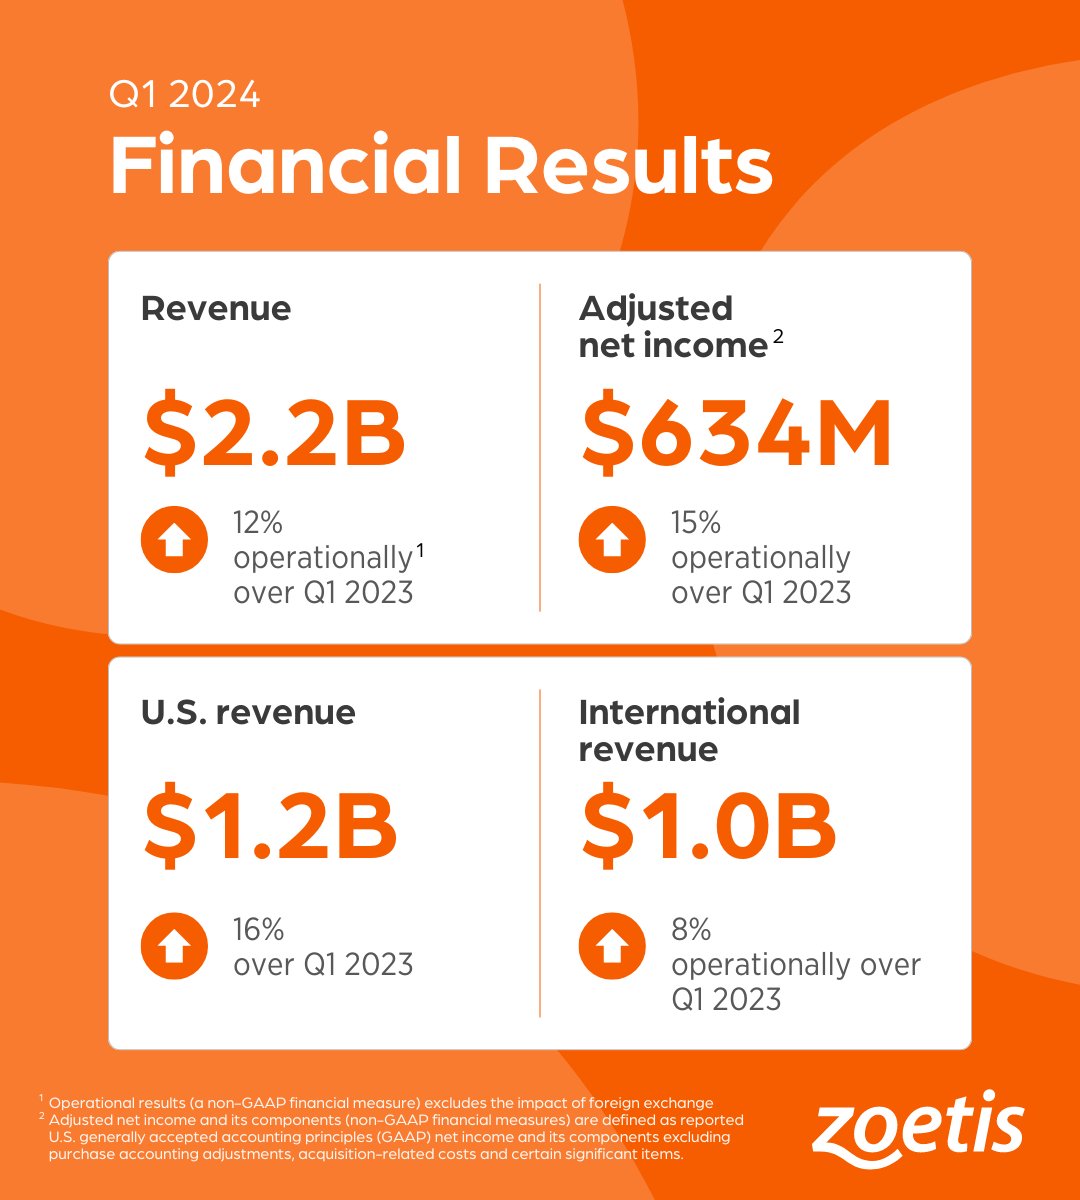 ICYMI: We recently shared our first quarter financial results. Our strong growth was fueled by the innovative franchises in our companion animal portfolio. Learn more here: investor.zoetis.com/events-and-pre…

#Earnings #AnimalHealth $ZTS